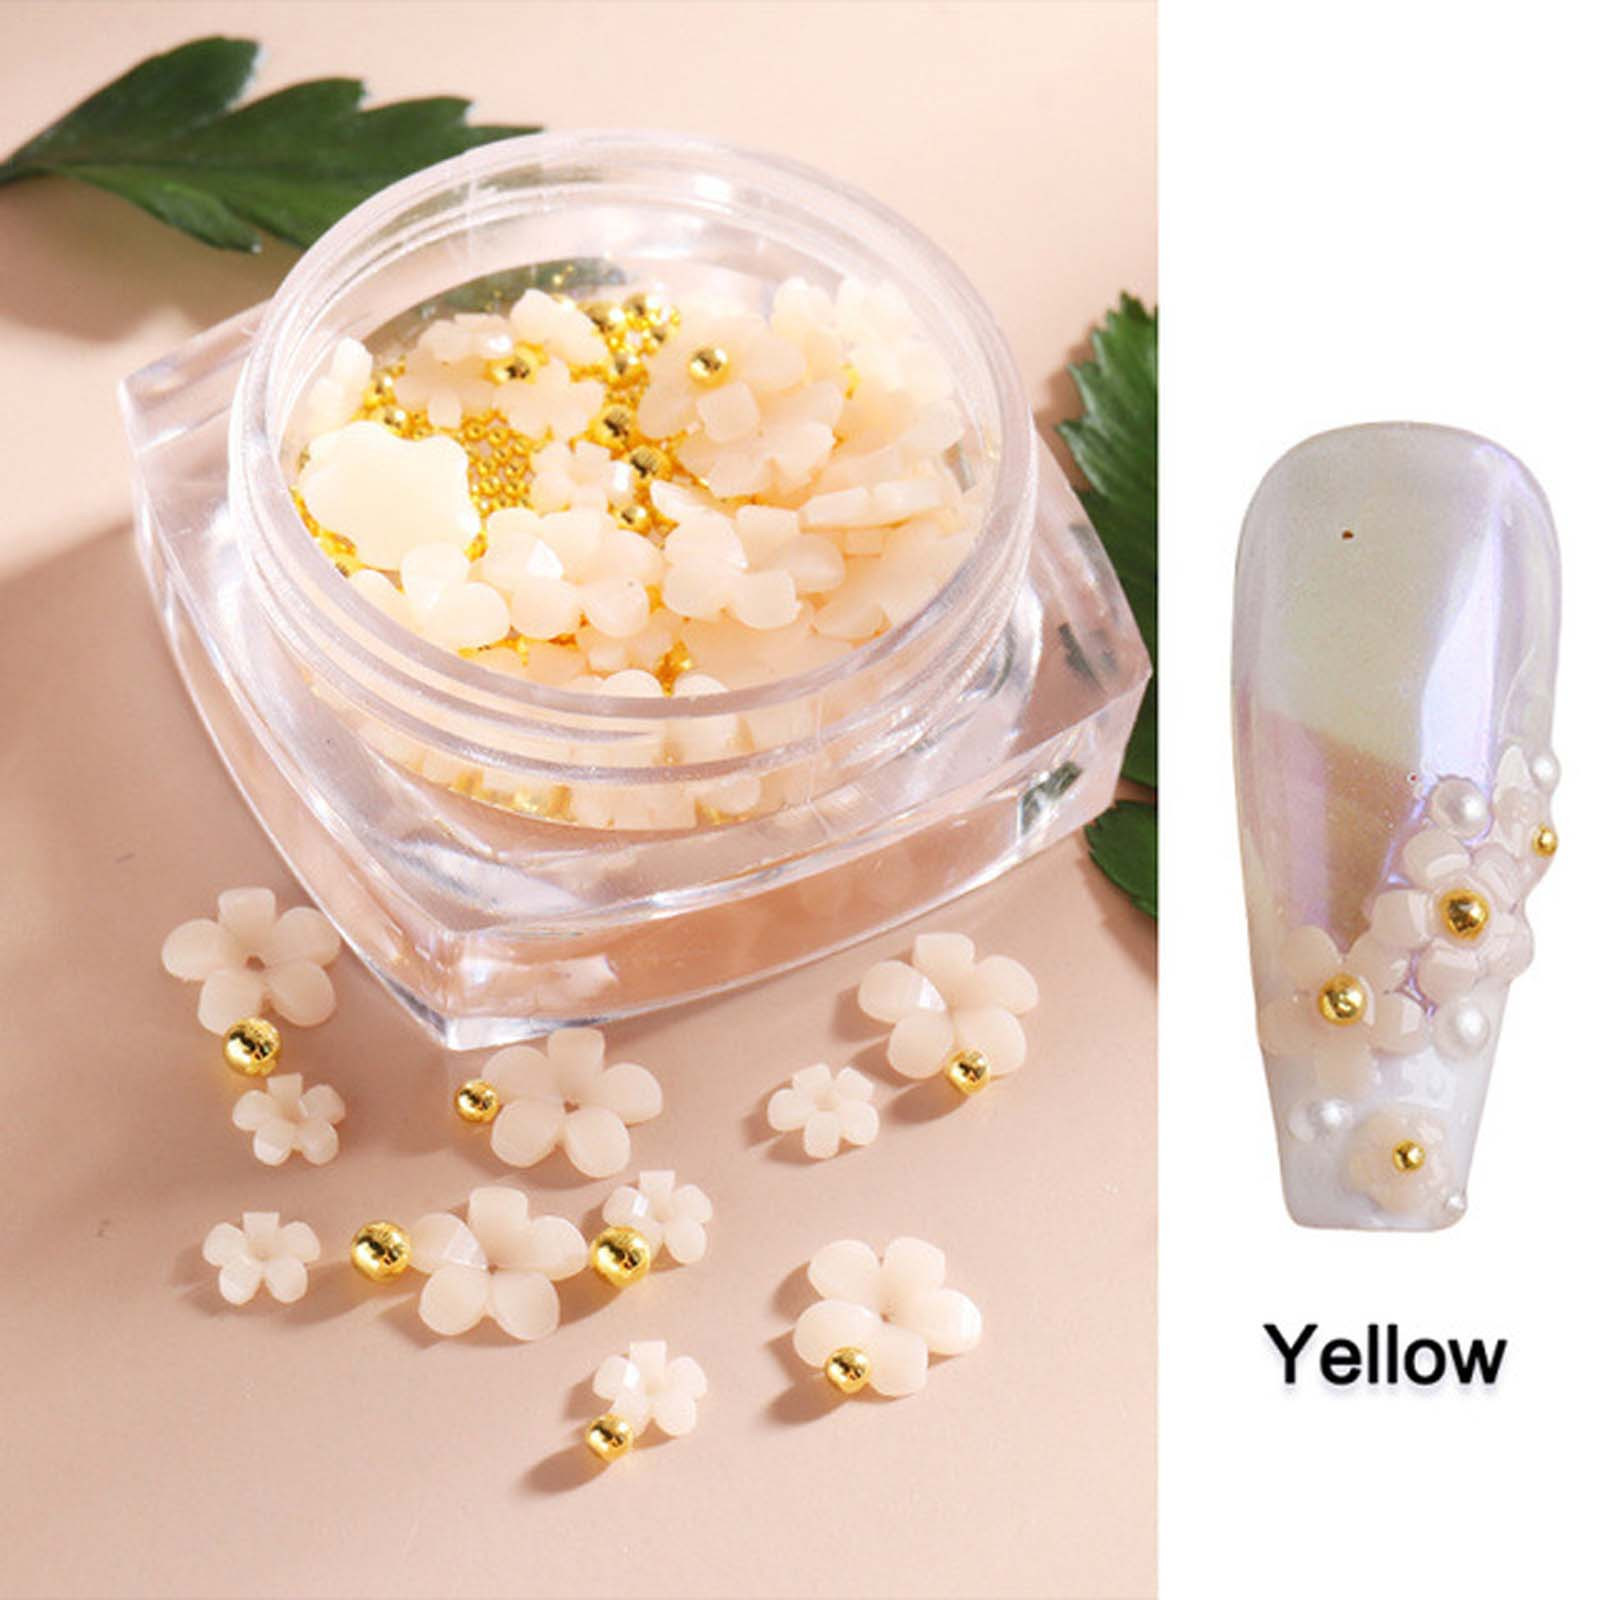 WUXICHEN 3D Floral Rhinestone Nail Art Jewelry 1 Boxes For Acrylic Nail Art Supplies - image 1 of 2